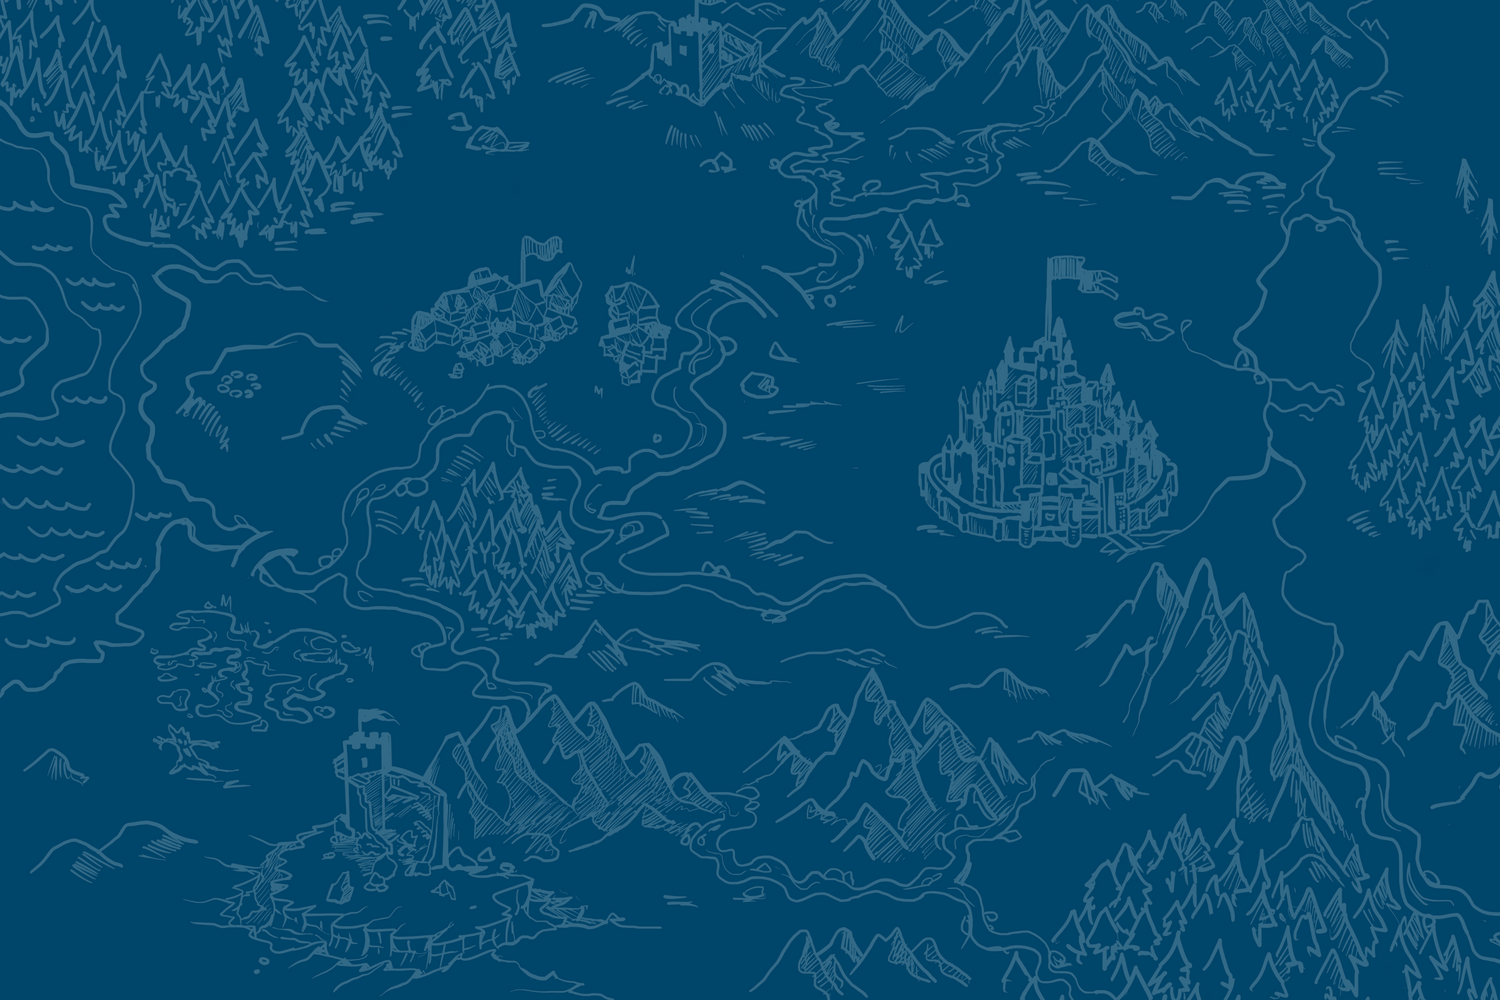 A fantasy hand drawn map in white on a dark blue background